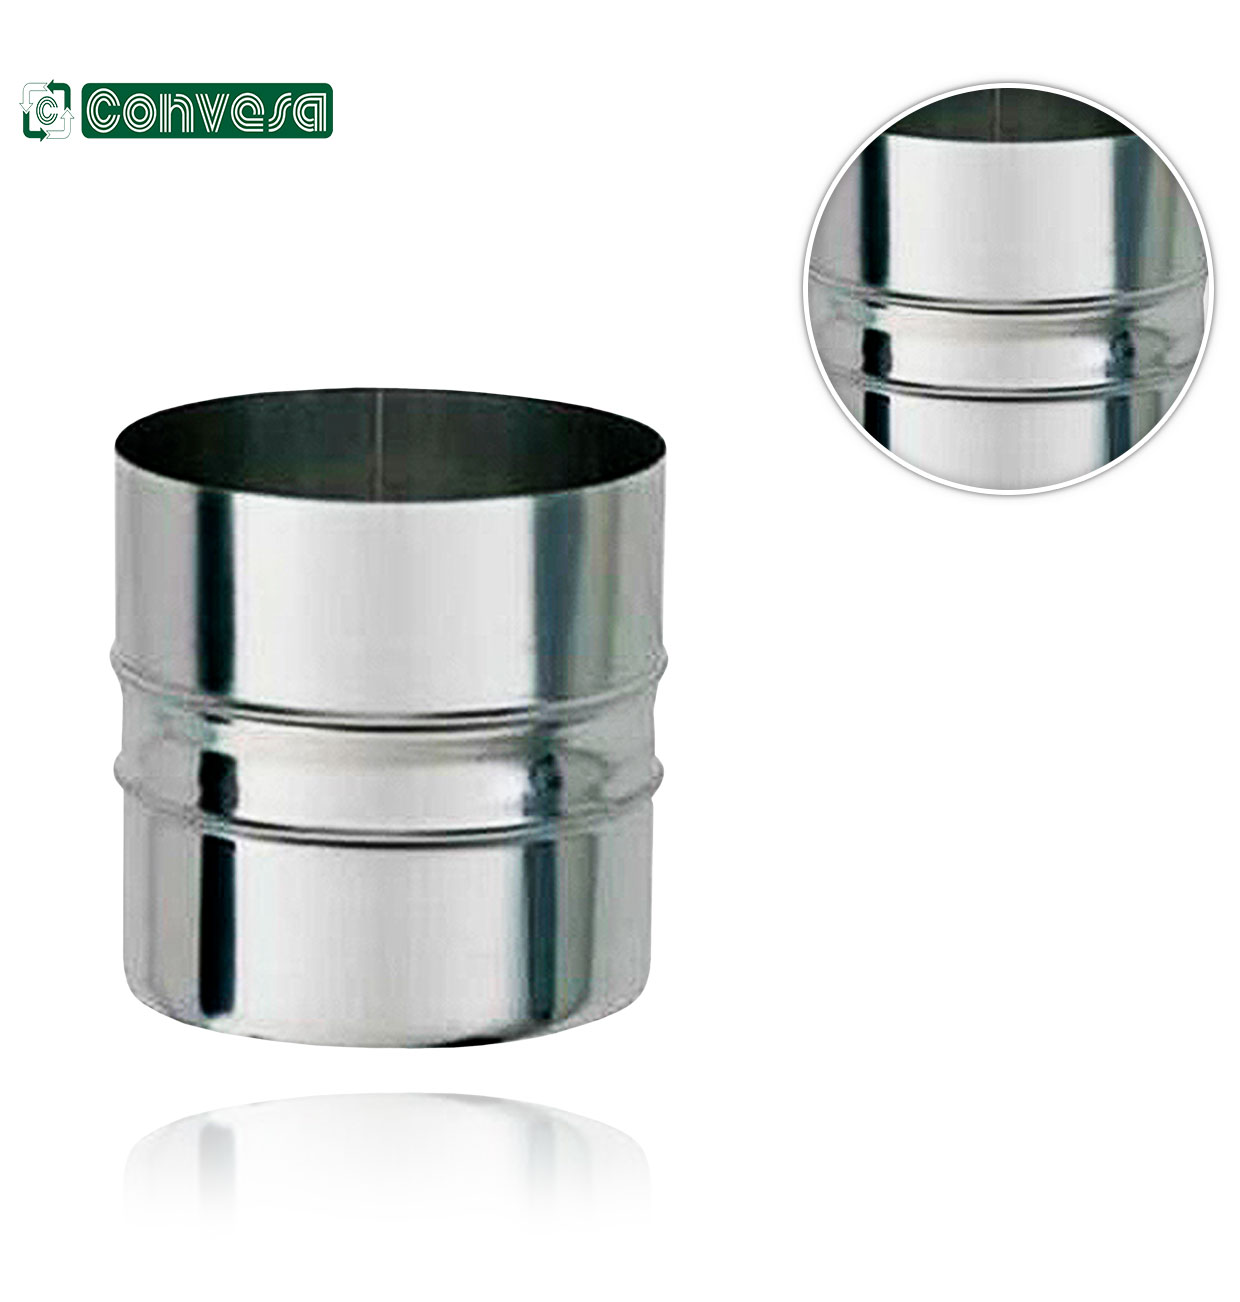 DOUBLE WALL-MOUNTED SINGLE CONNECTING SLEEVE + 200 diameter STAINLESS STEEL CLAMP